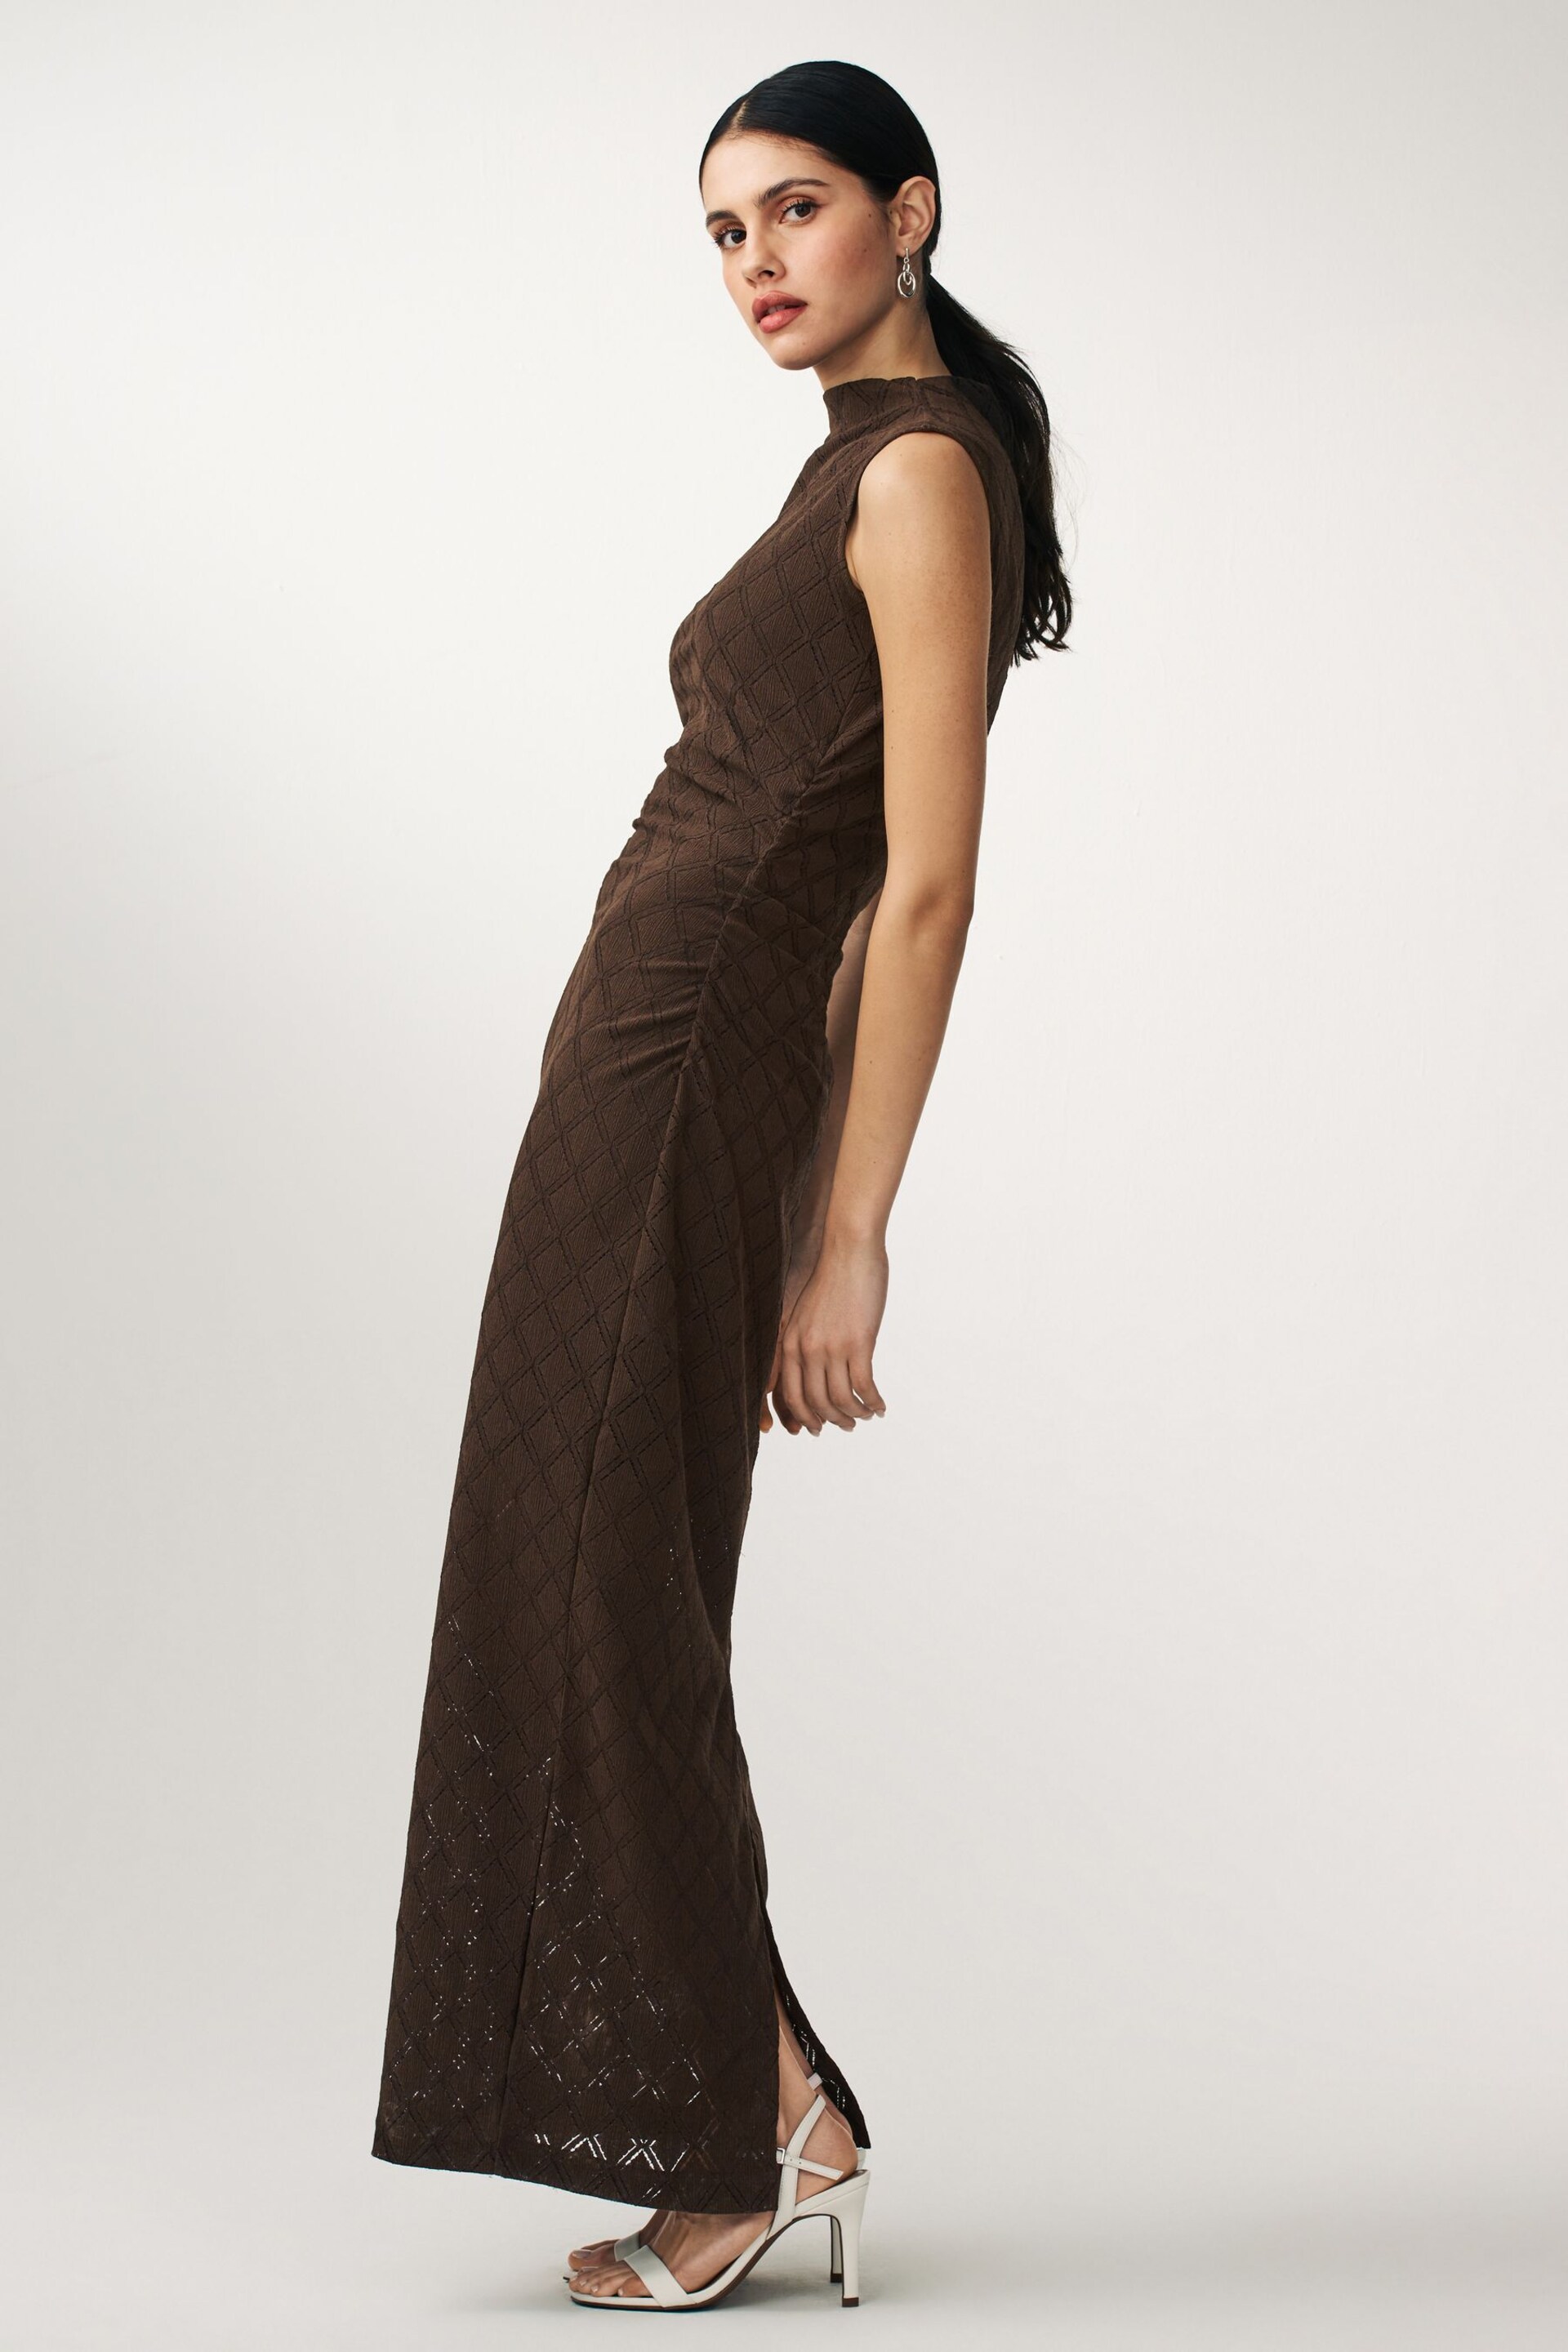 Brown Diamond Textured Sleeveless Ruched Maxi Dress - Image 1 of 6